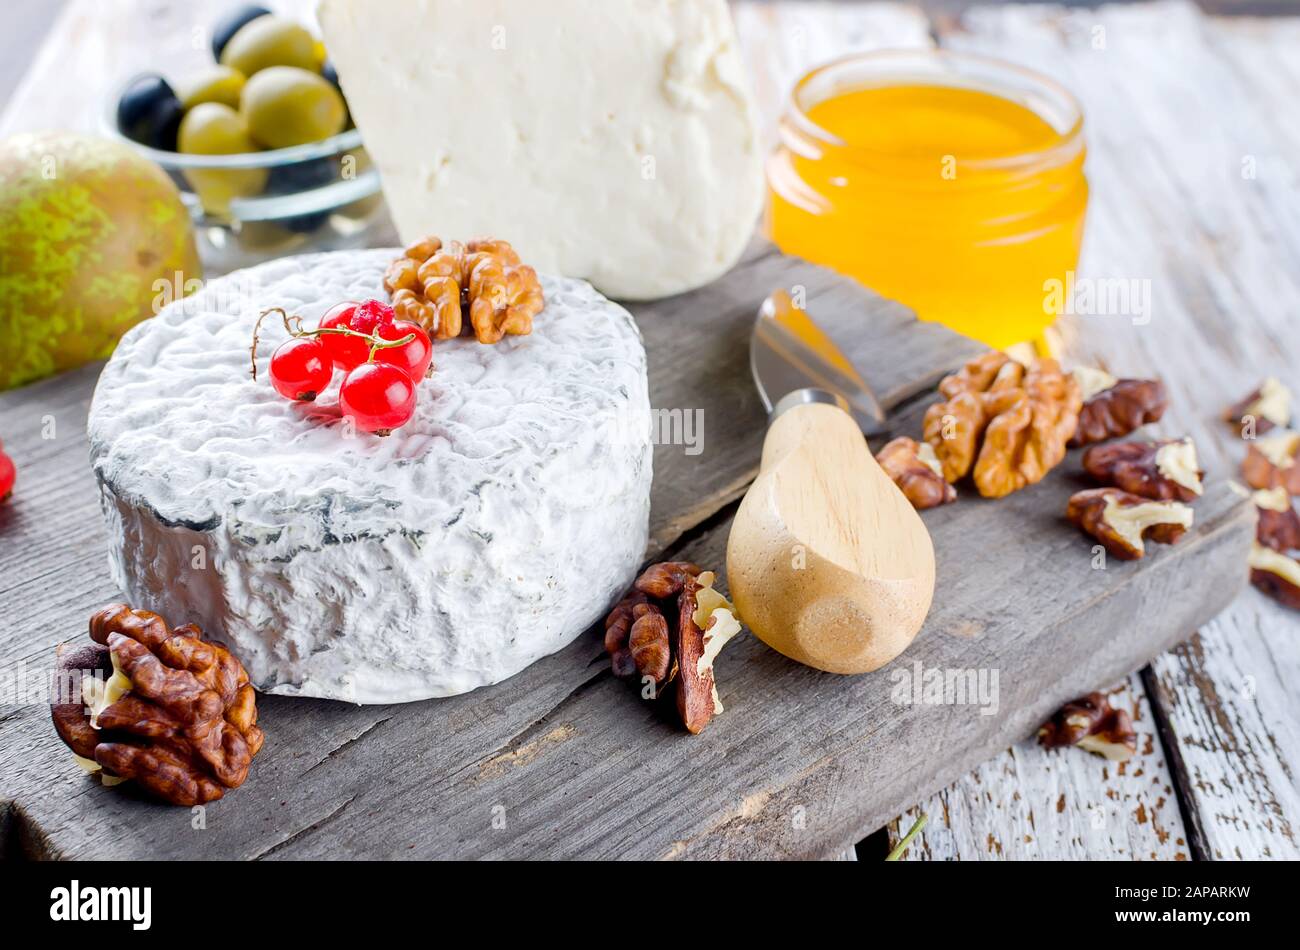 Different kinds of Delicious cheeses on a wooden board and many snack, nuts, honey, berries, olives on a white old wooden table. Food ingredients back Stock Photo